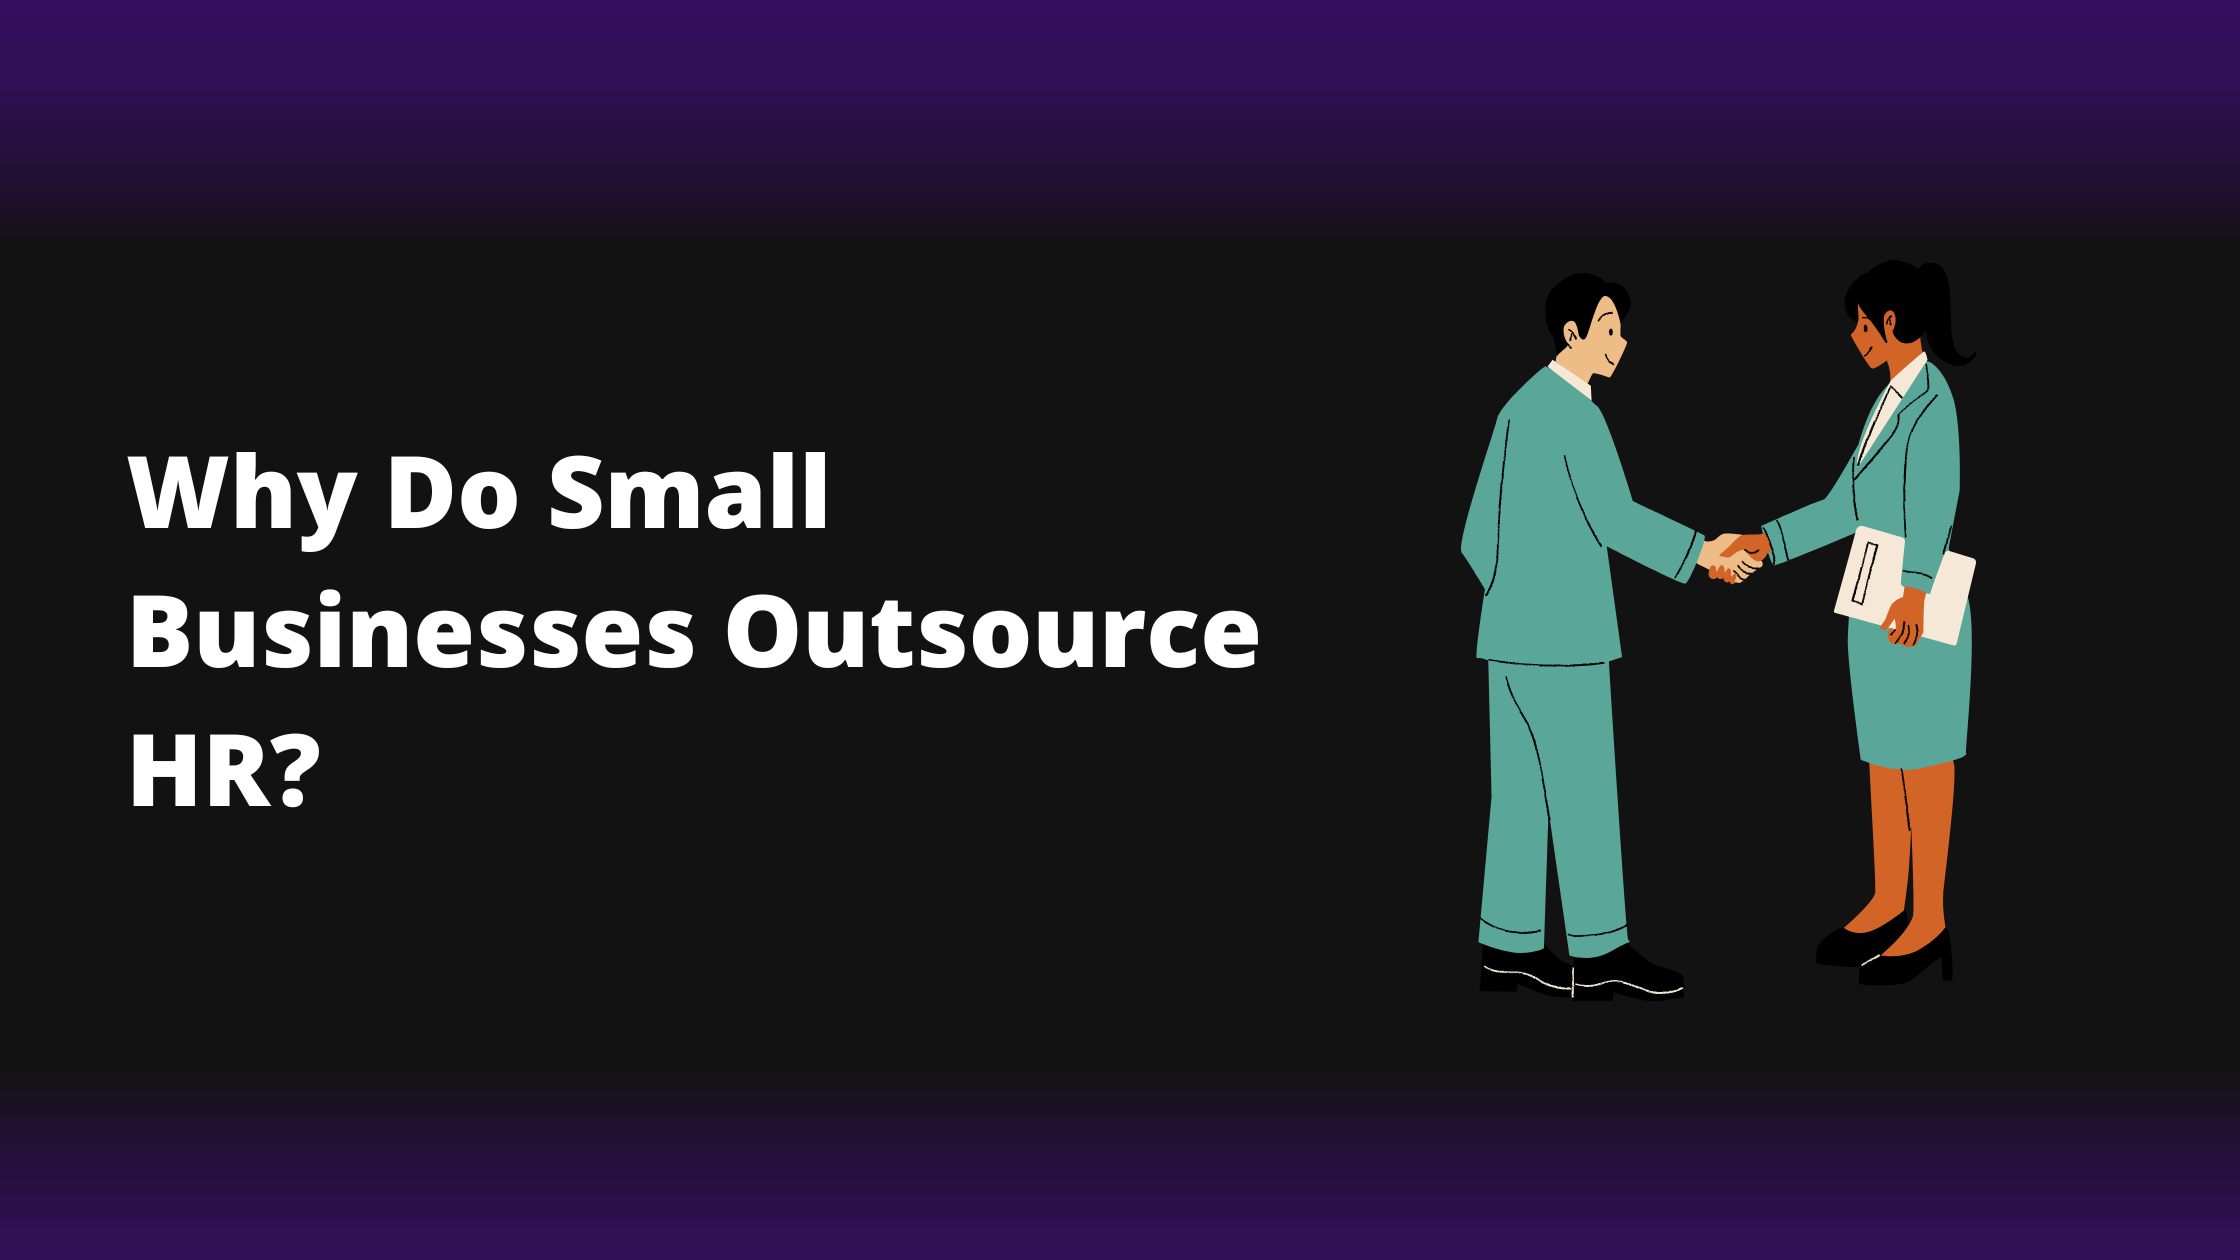 Why Do Small Businesses Outsource HR?